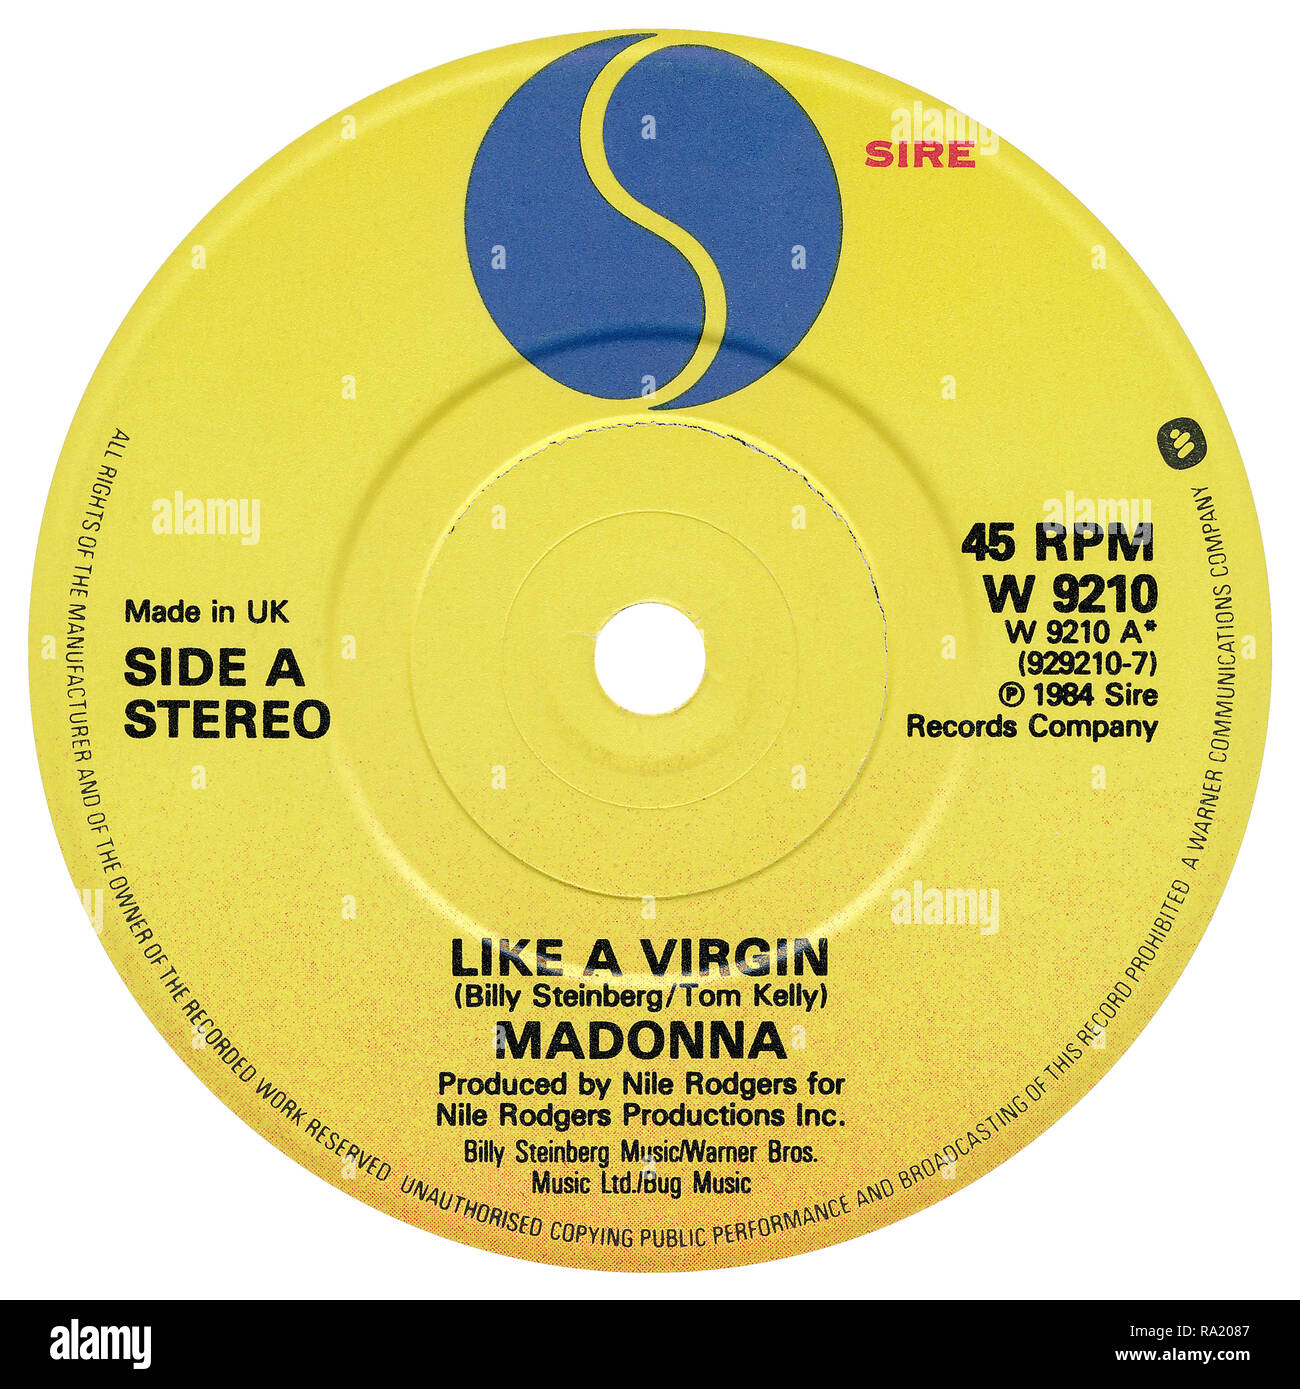 UK 45 rpm 7' single of Like A Virgin by Madonna on the Sire record label from 1984. Written by Billy Steinberg and Tom Kelly and produced by Nile Rodgers. Stock Photo